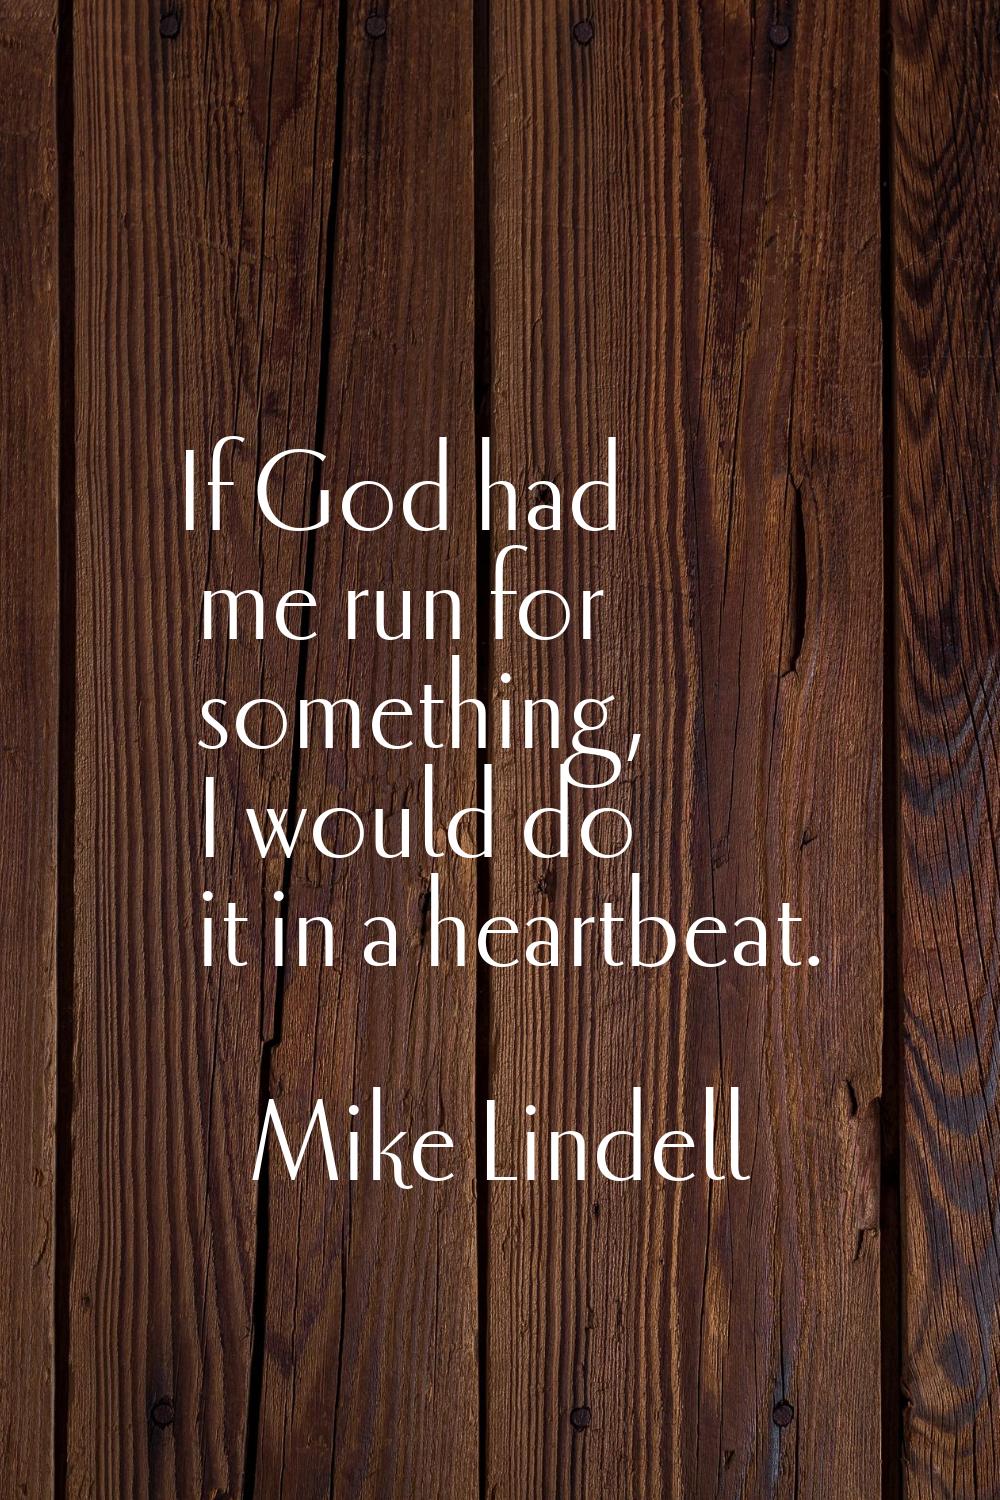 If God had me run for something, I would do it in a heartbeat.